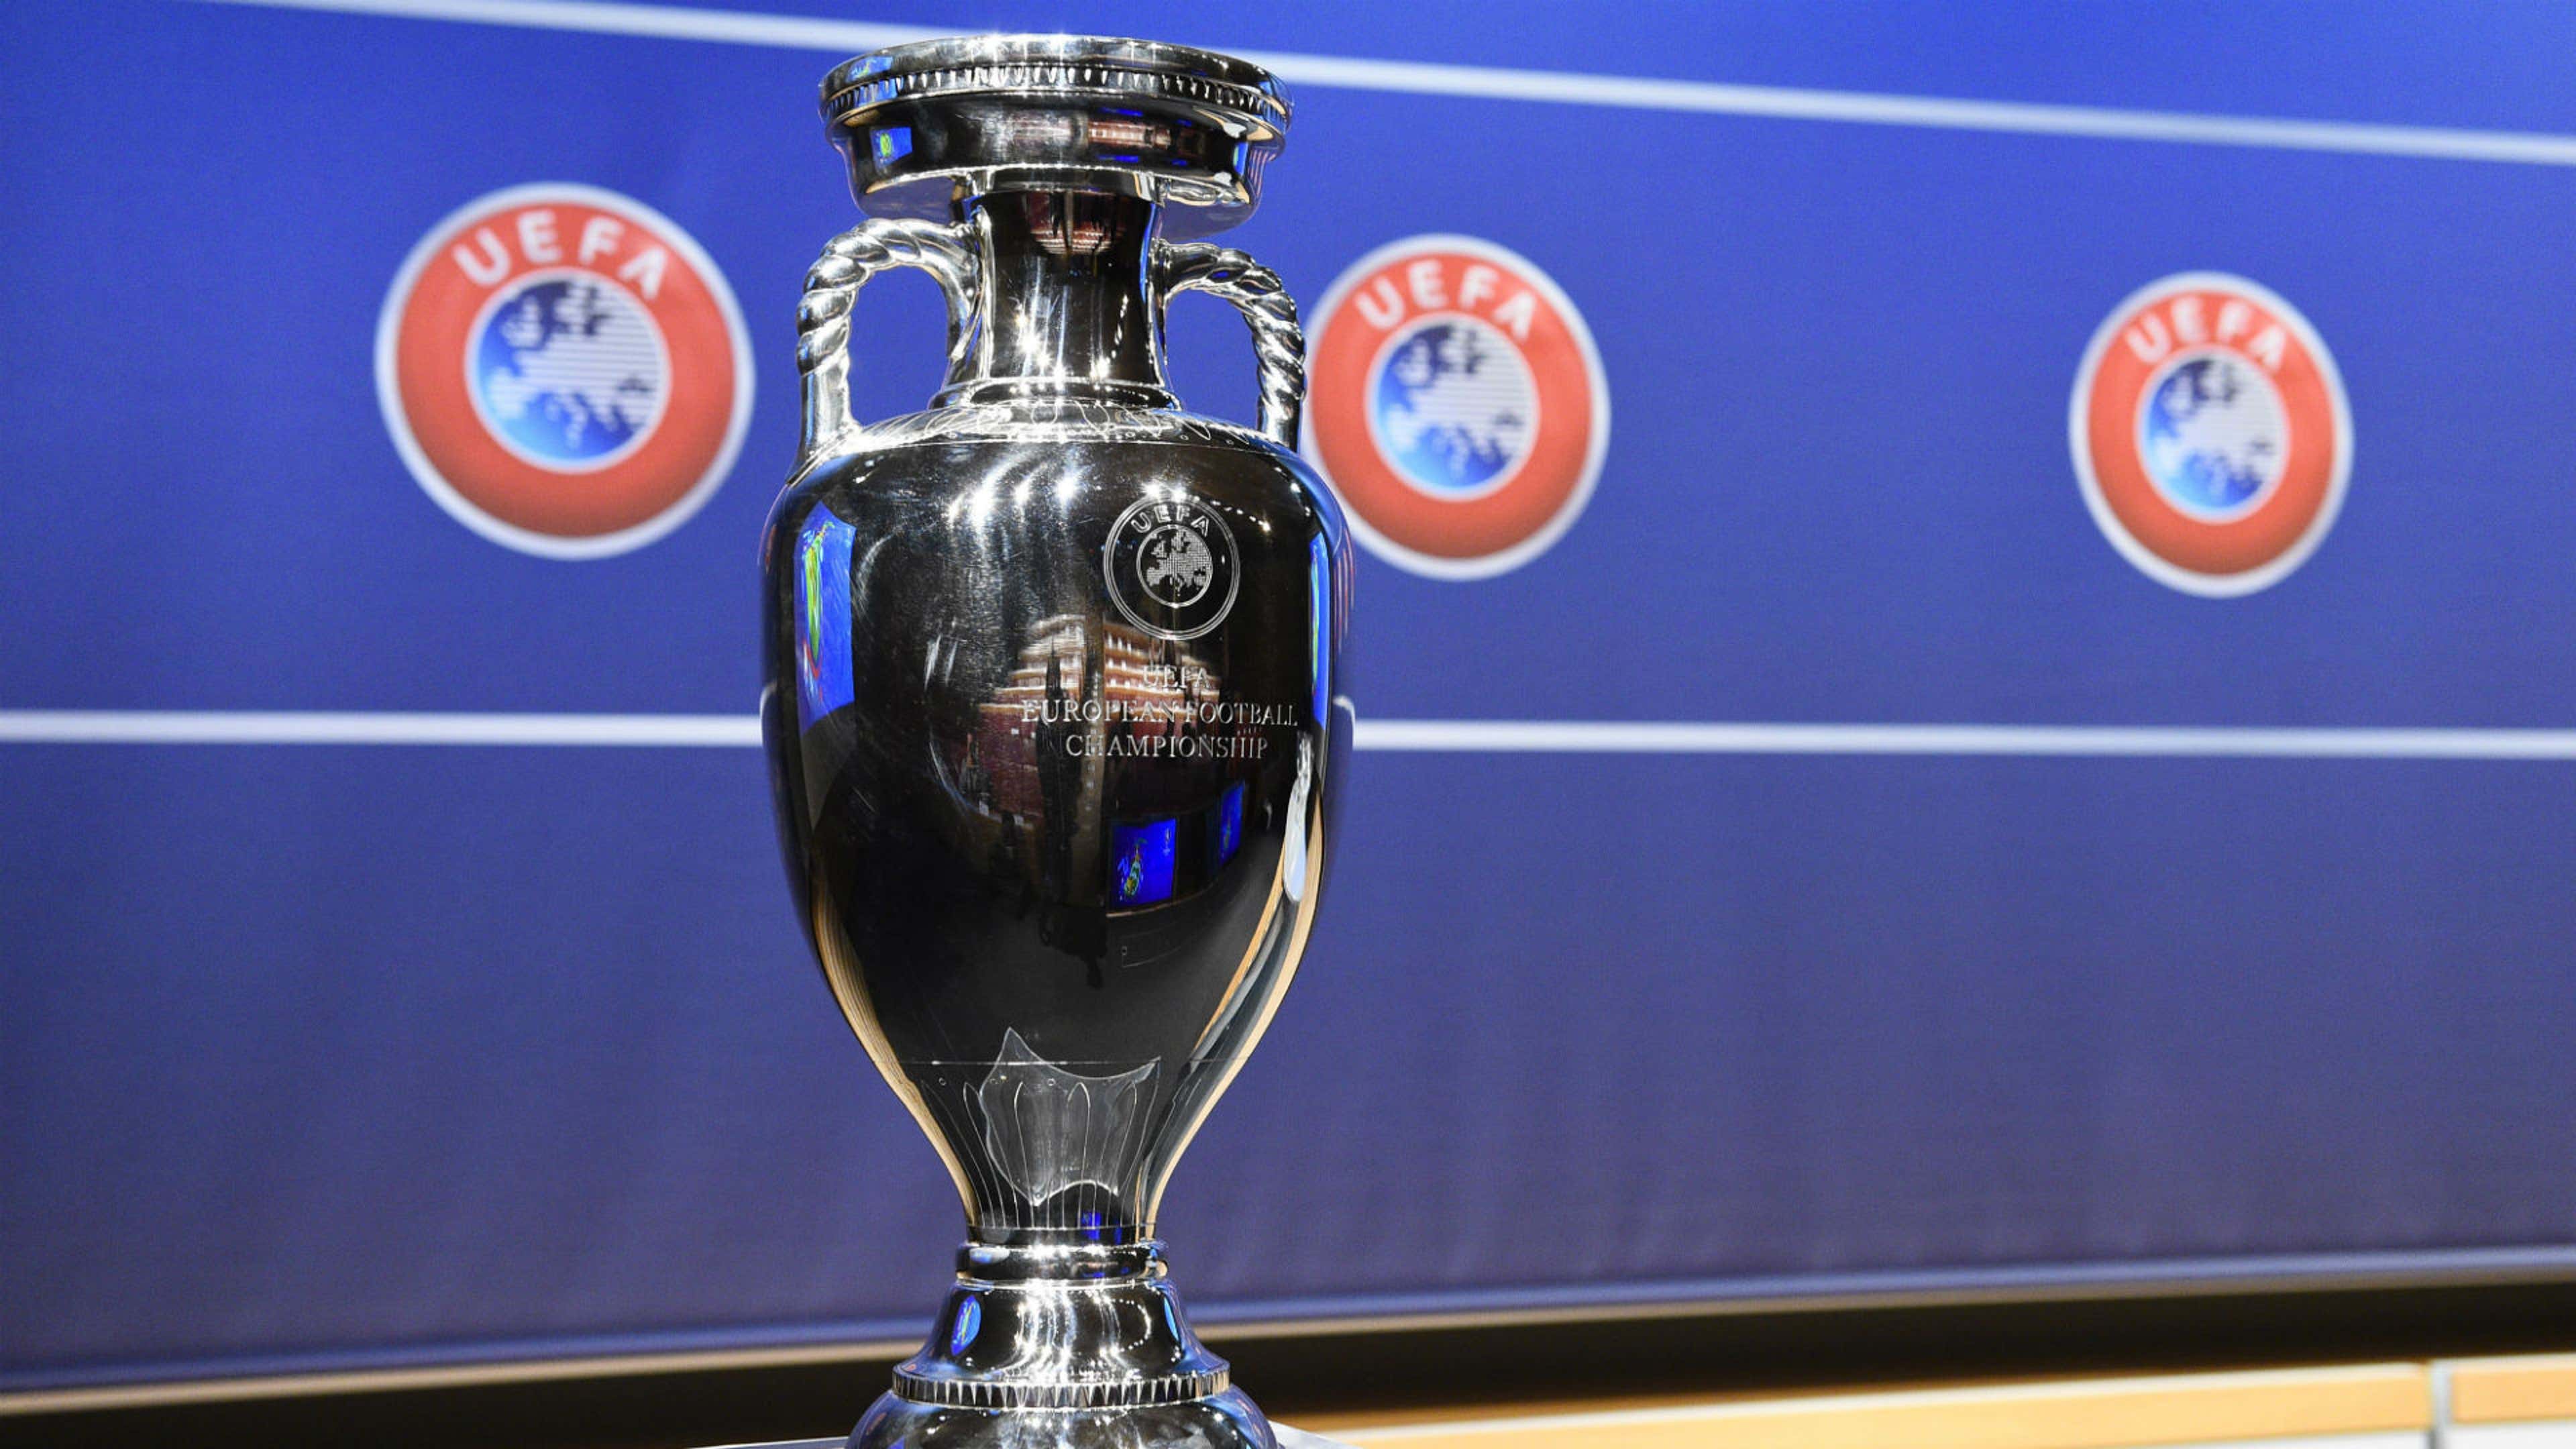 European Championship trophy - Cropped